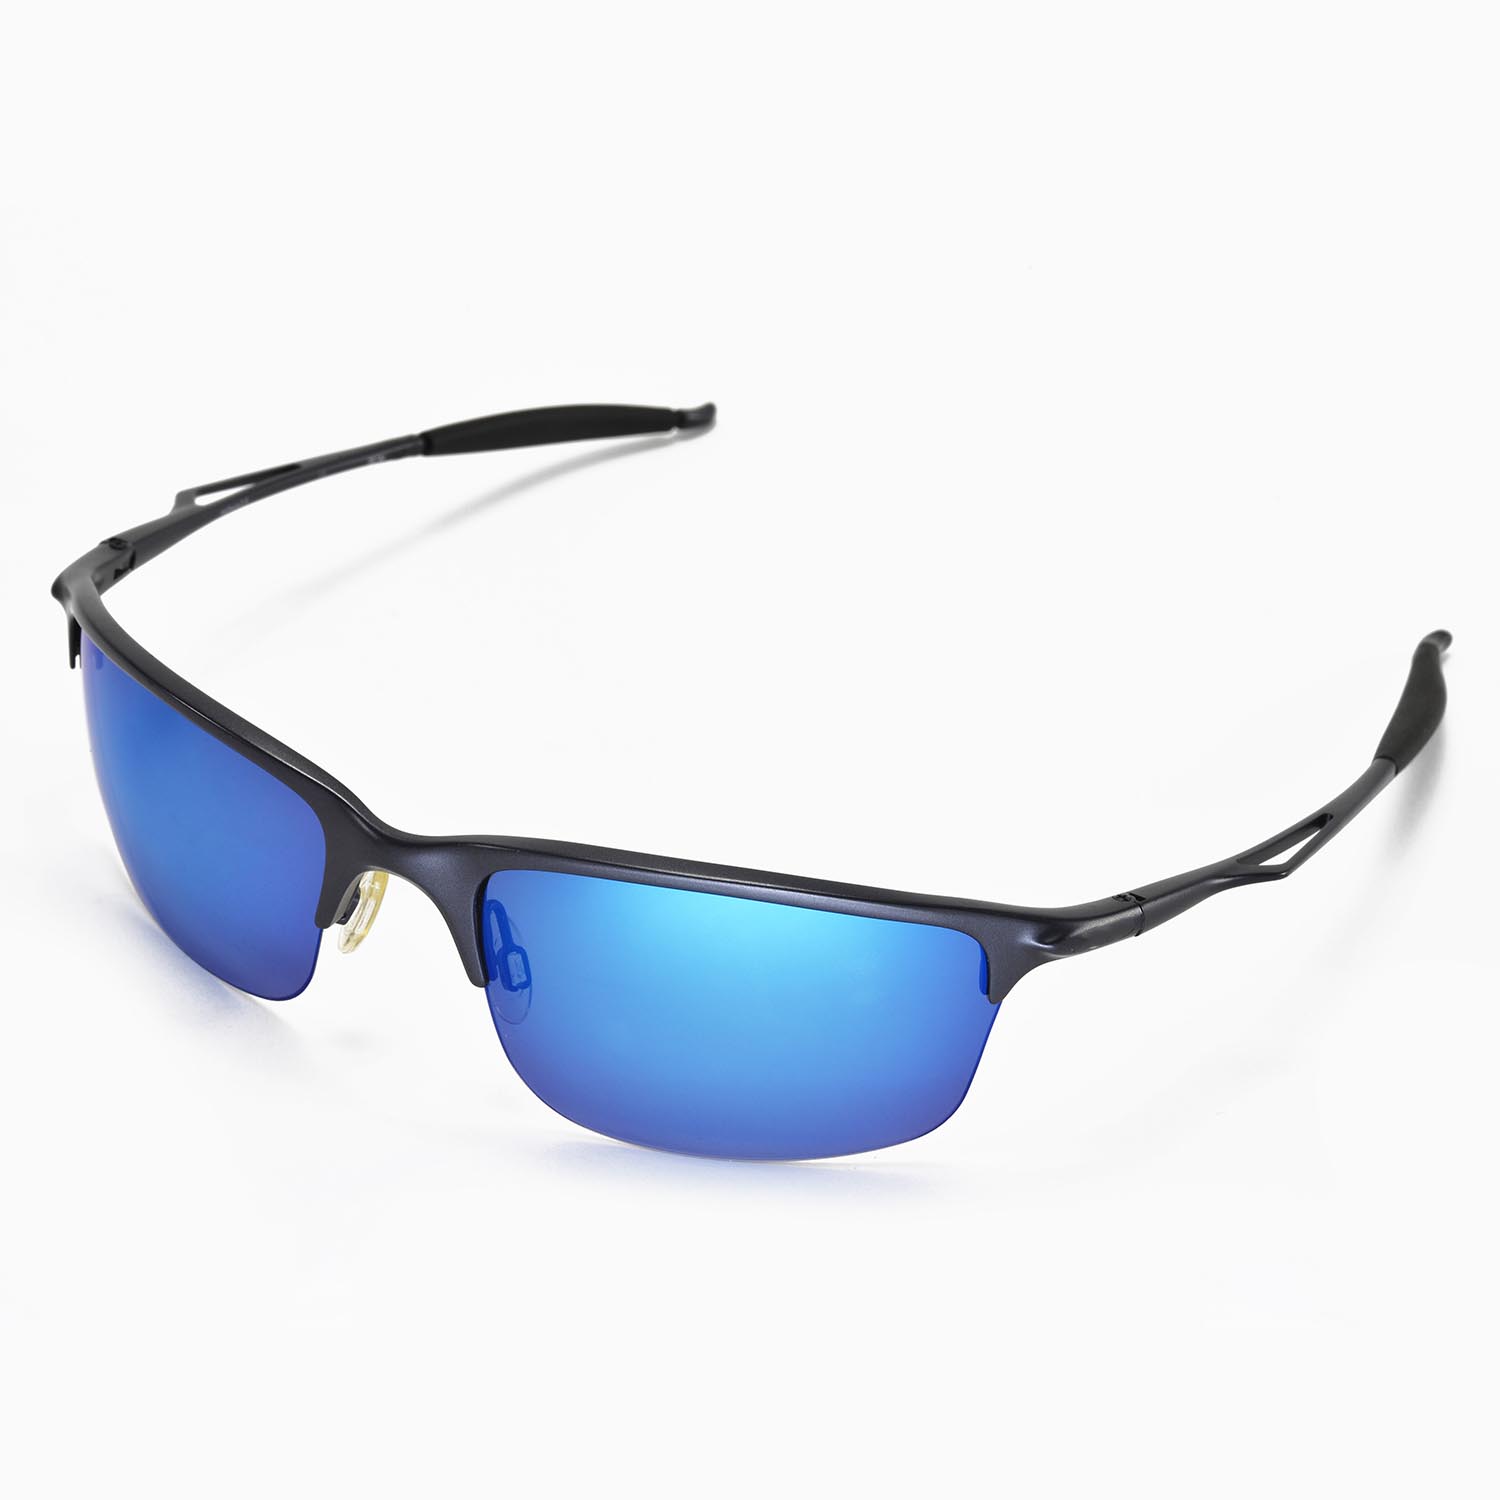 Walleva Ice Blue Polarized Replacement Lenses for Oakley Half Wire 2.0 Sunglasses - image 4 of 6